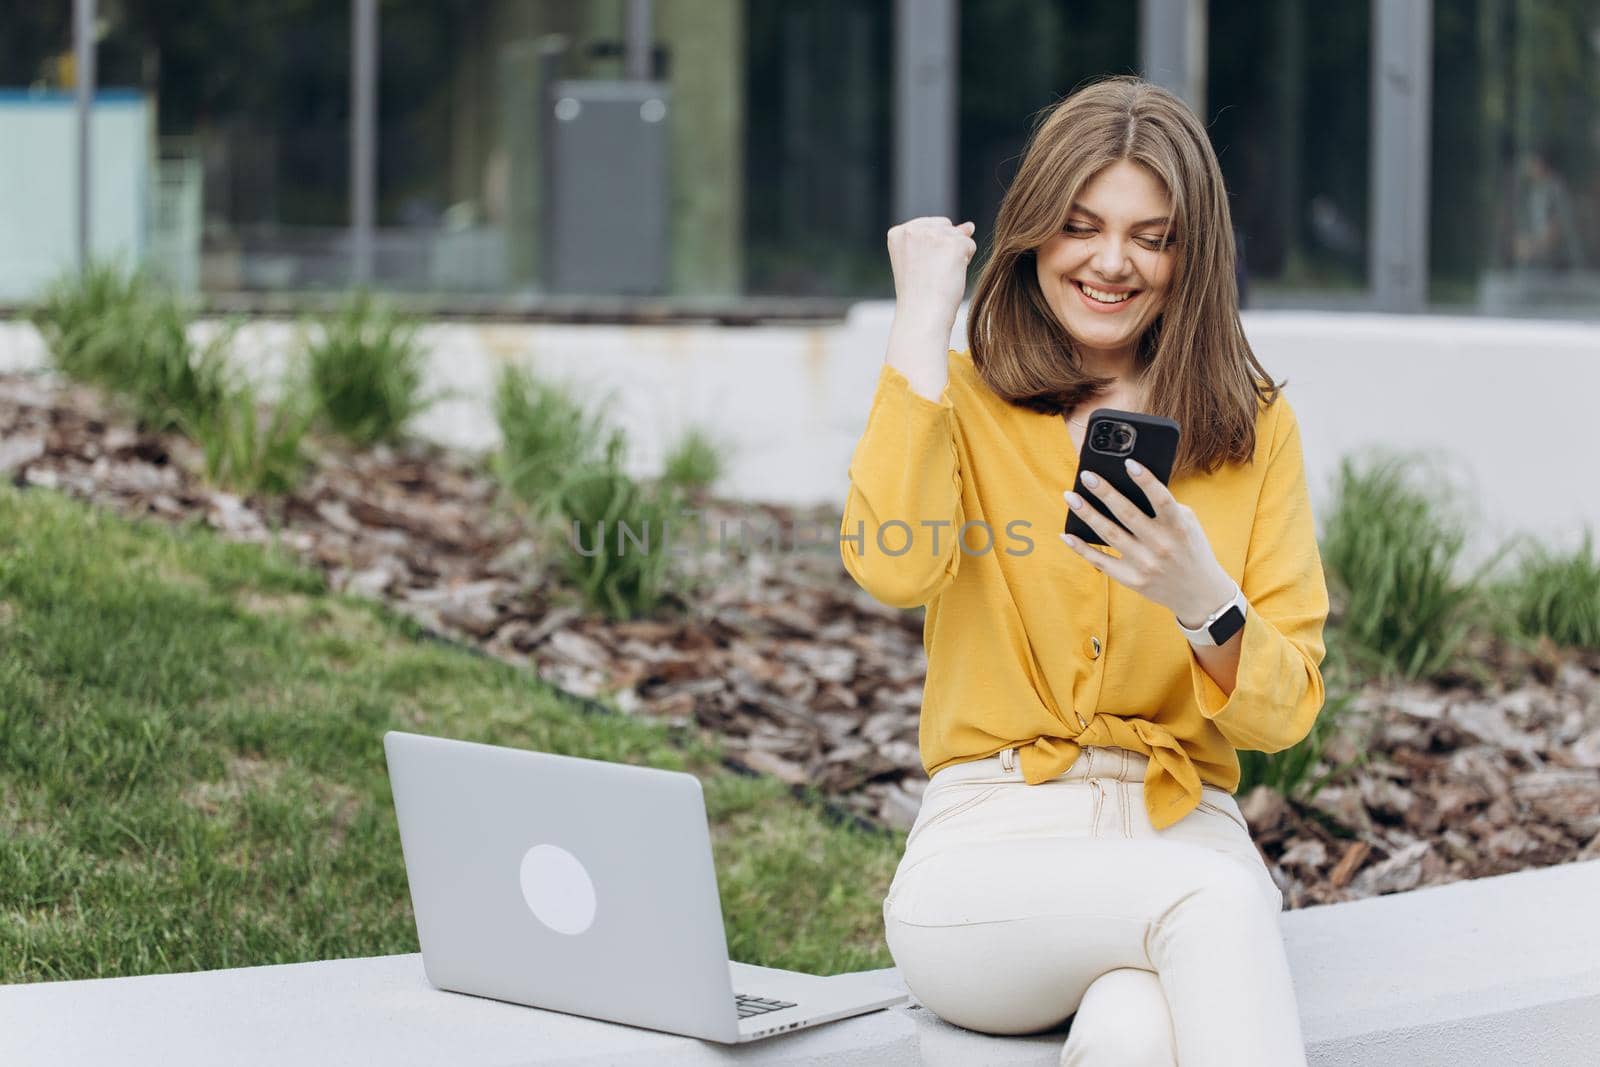 Joyful girl reading good news on phone. Surprised lady celebrating victory on smartphone outdoor. Portrait of happy business caucasian woman enjoy success on mobile phone by uflypro